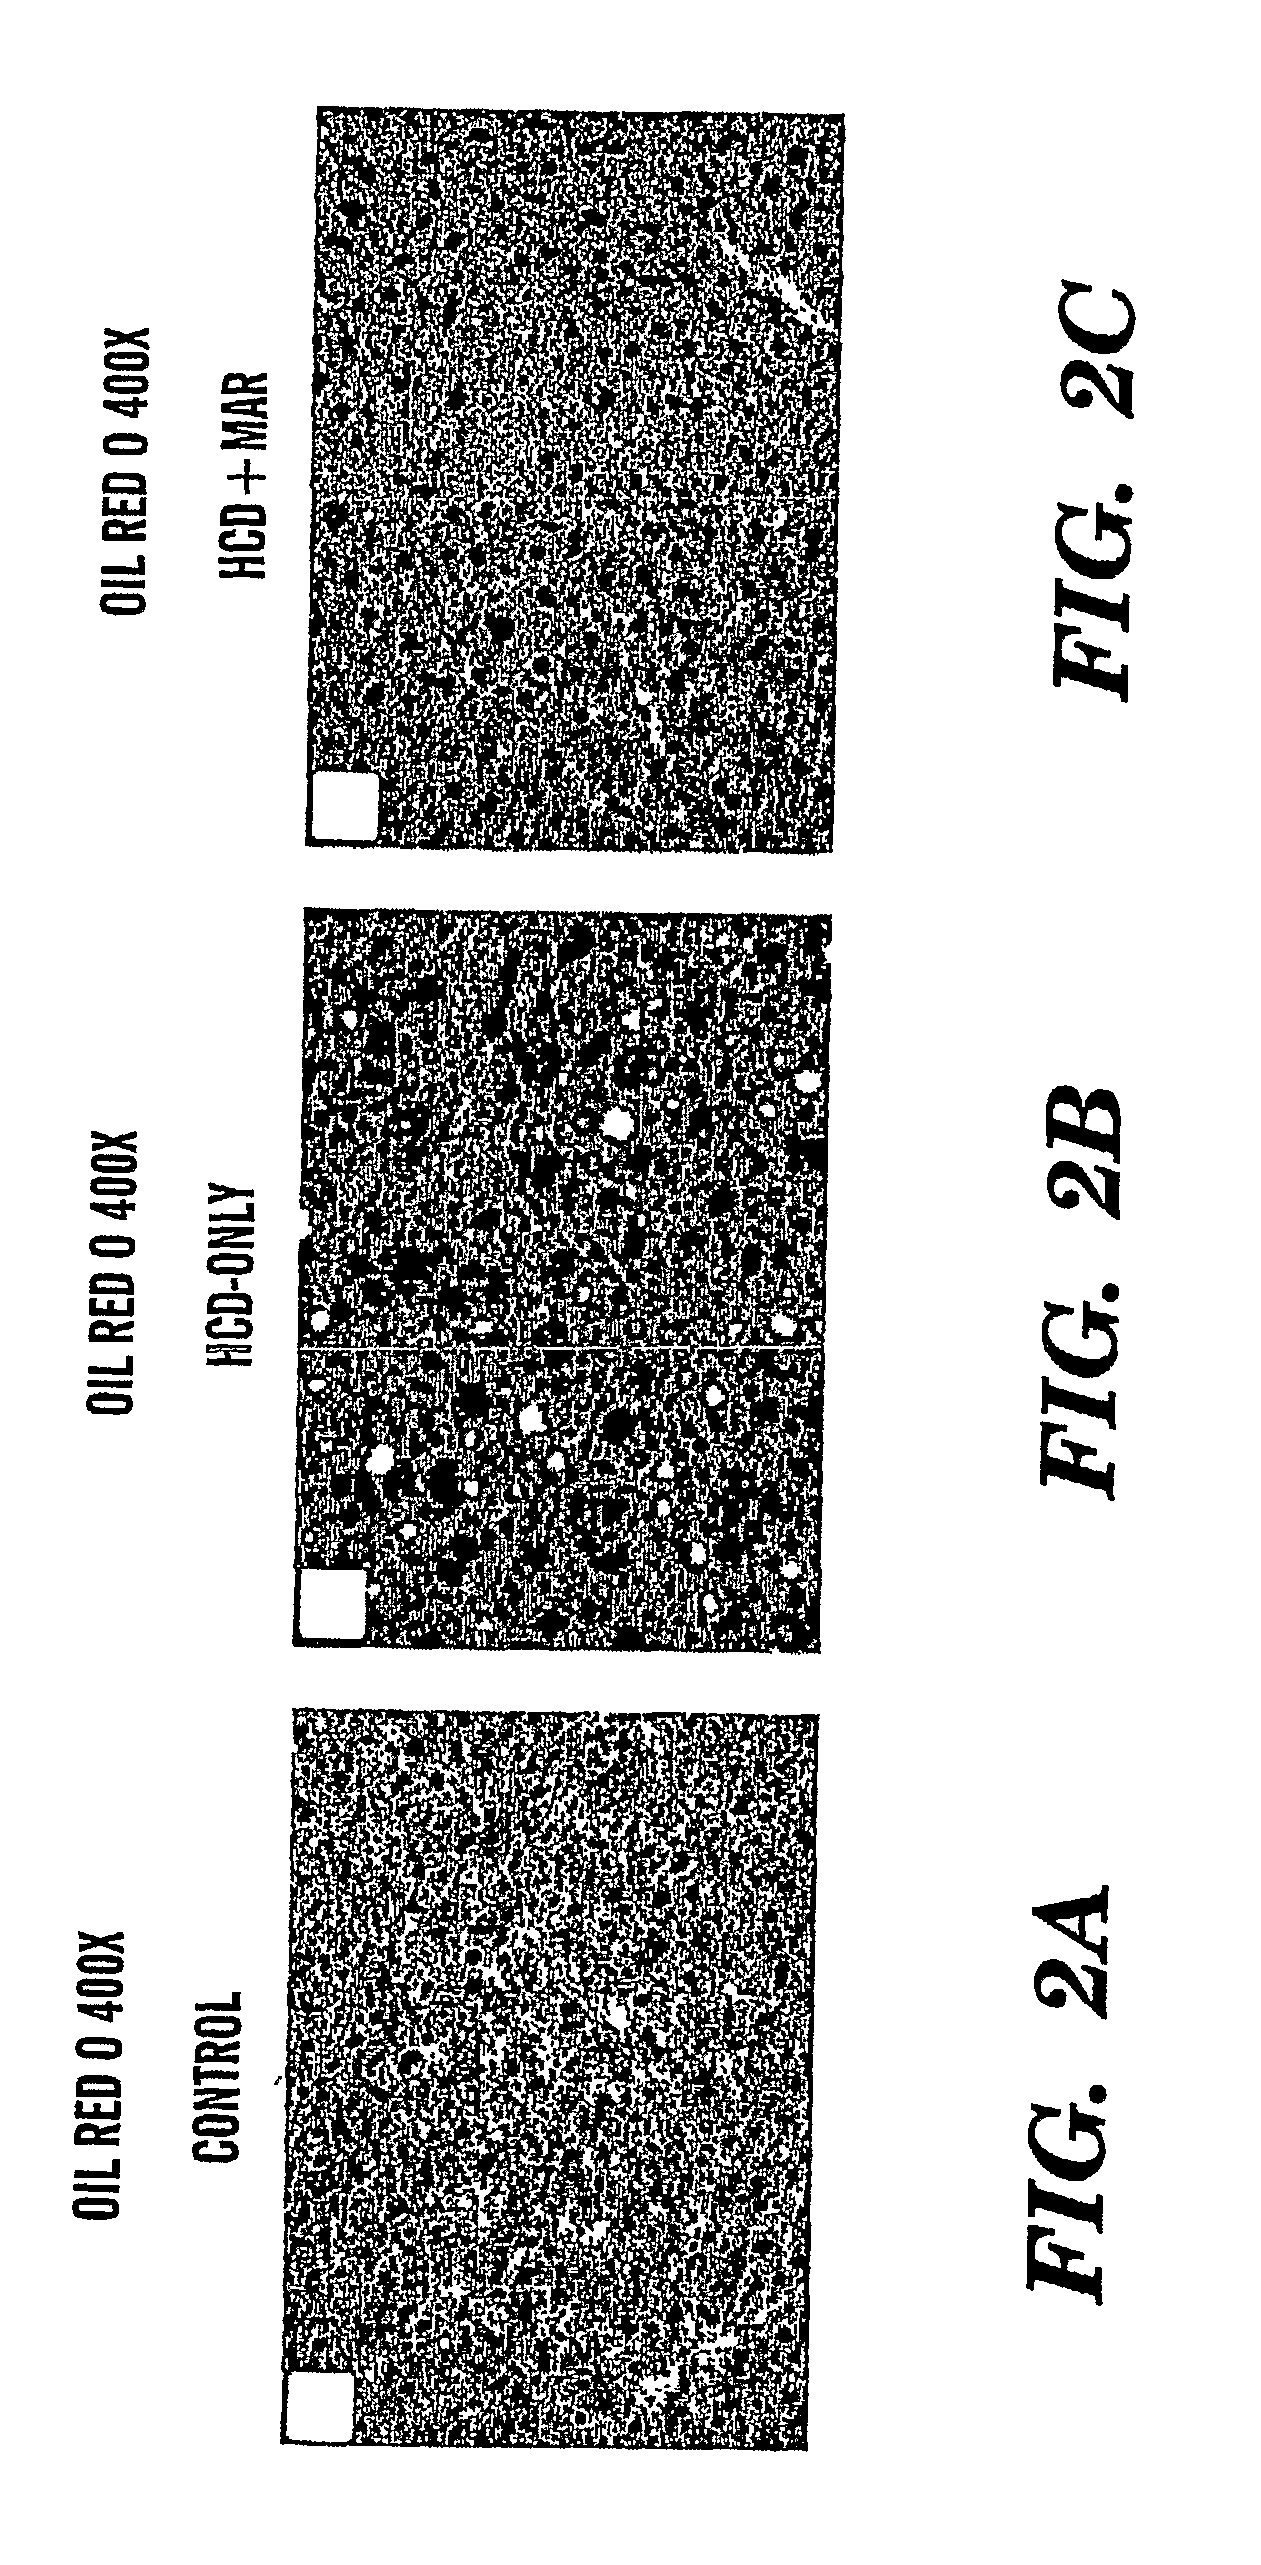 Method of treating fatty liver disease